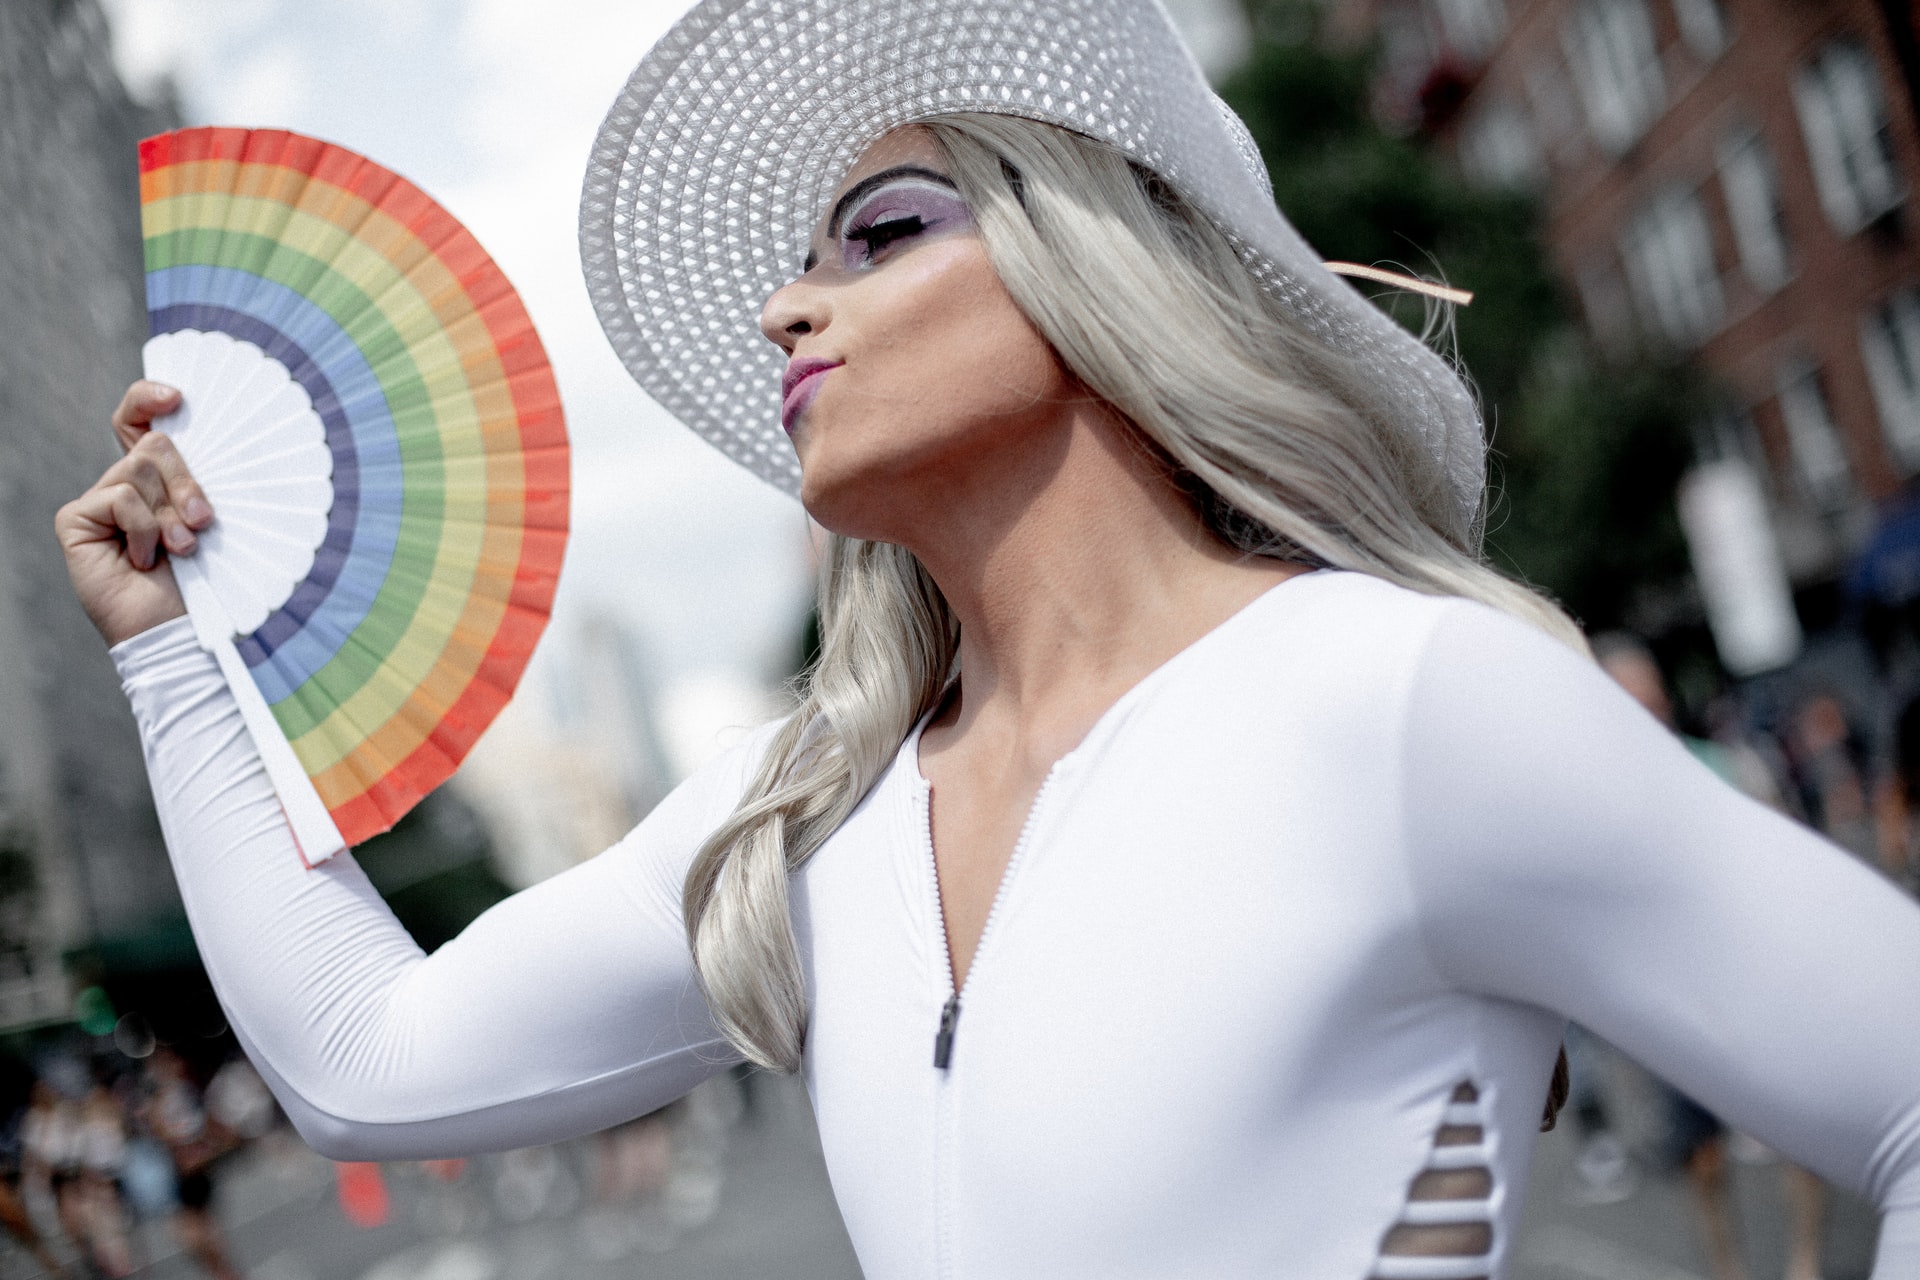 Celebrating at the last New York Pride in 2019. In the wake of the Black Lives Matter protests of 2020, this year’s Pride will strike a different tone. Image credit: Bryan Kyed/Unsplash